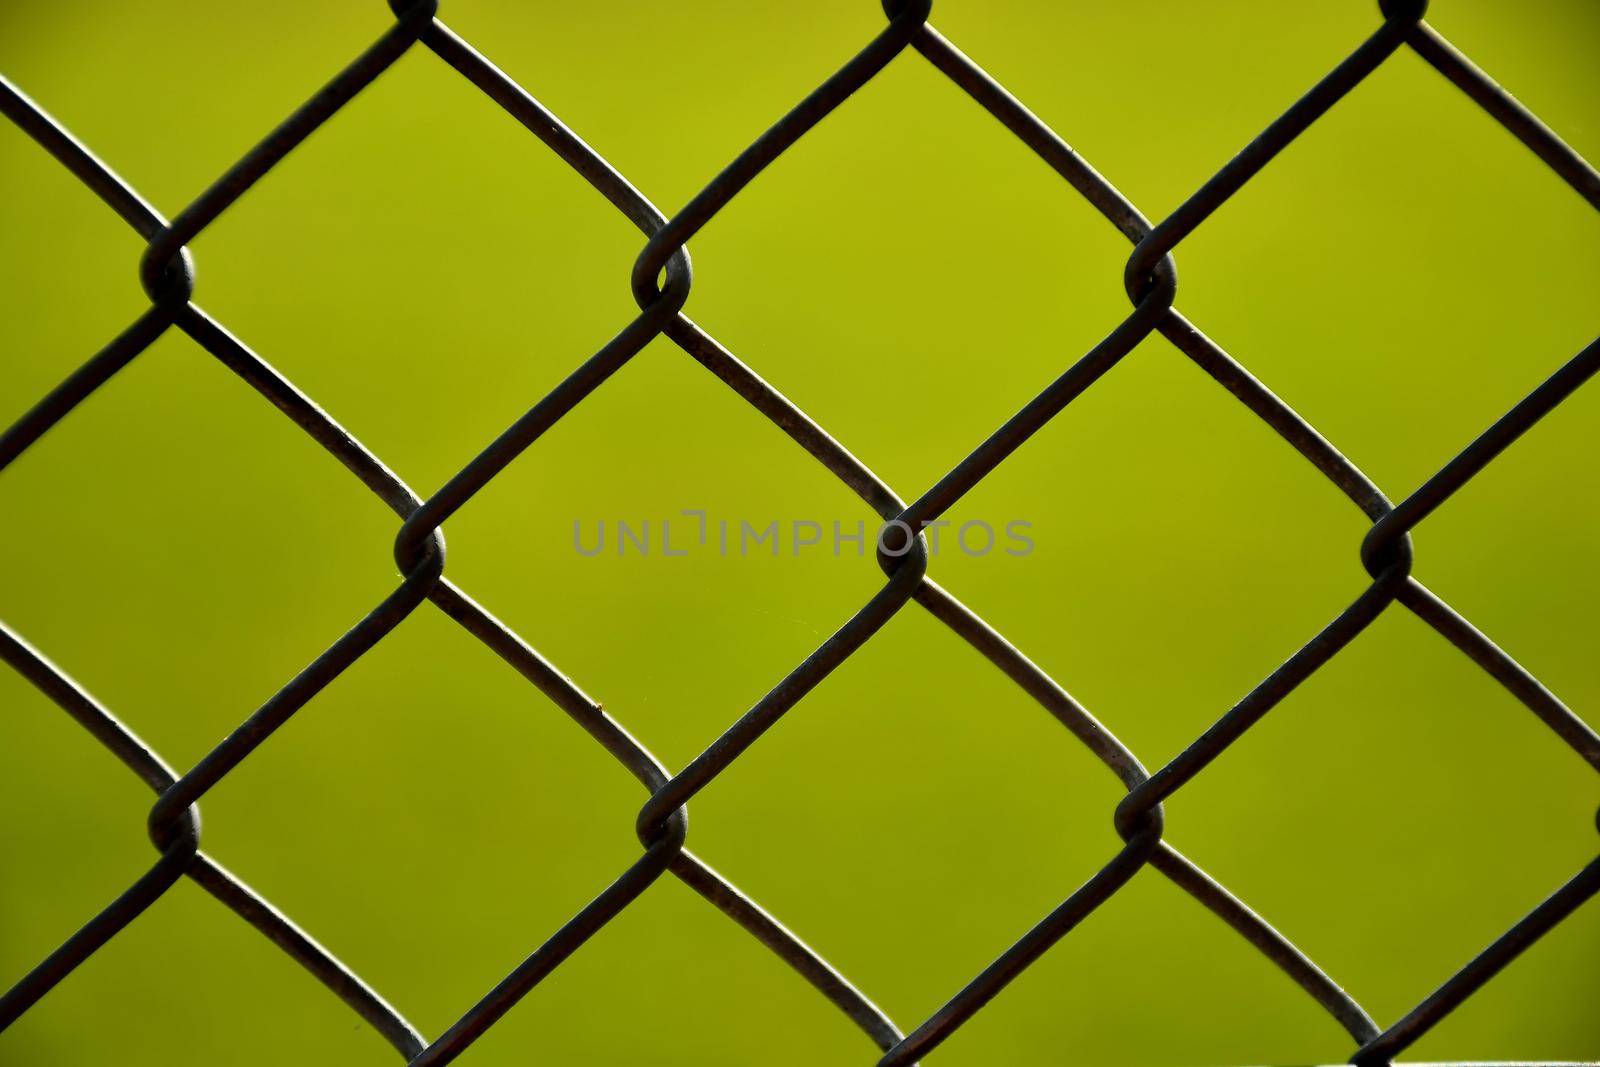 fence with green, blurred background